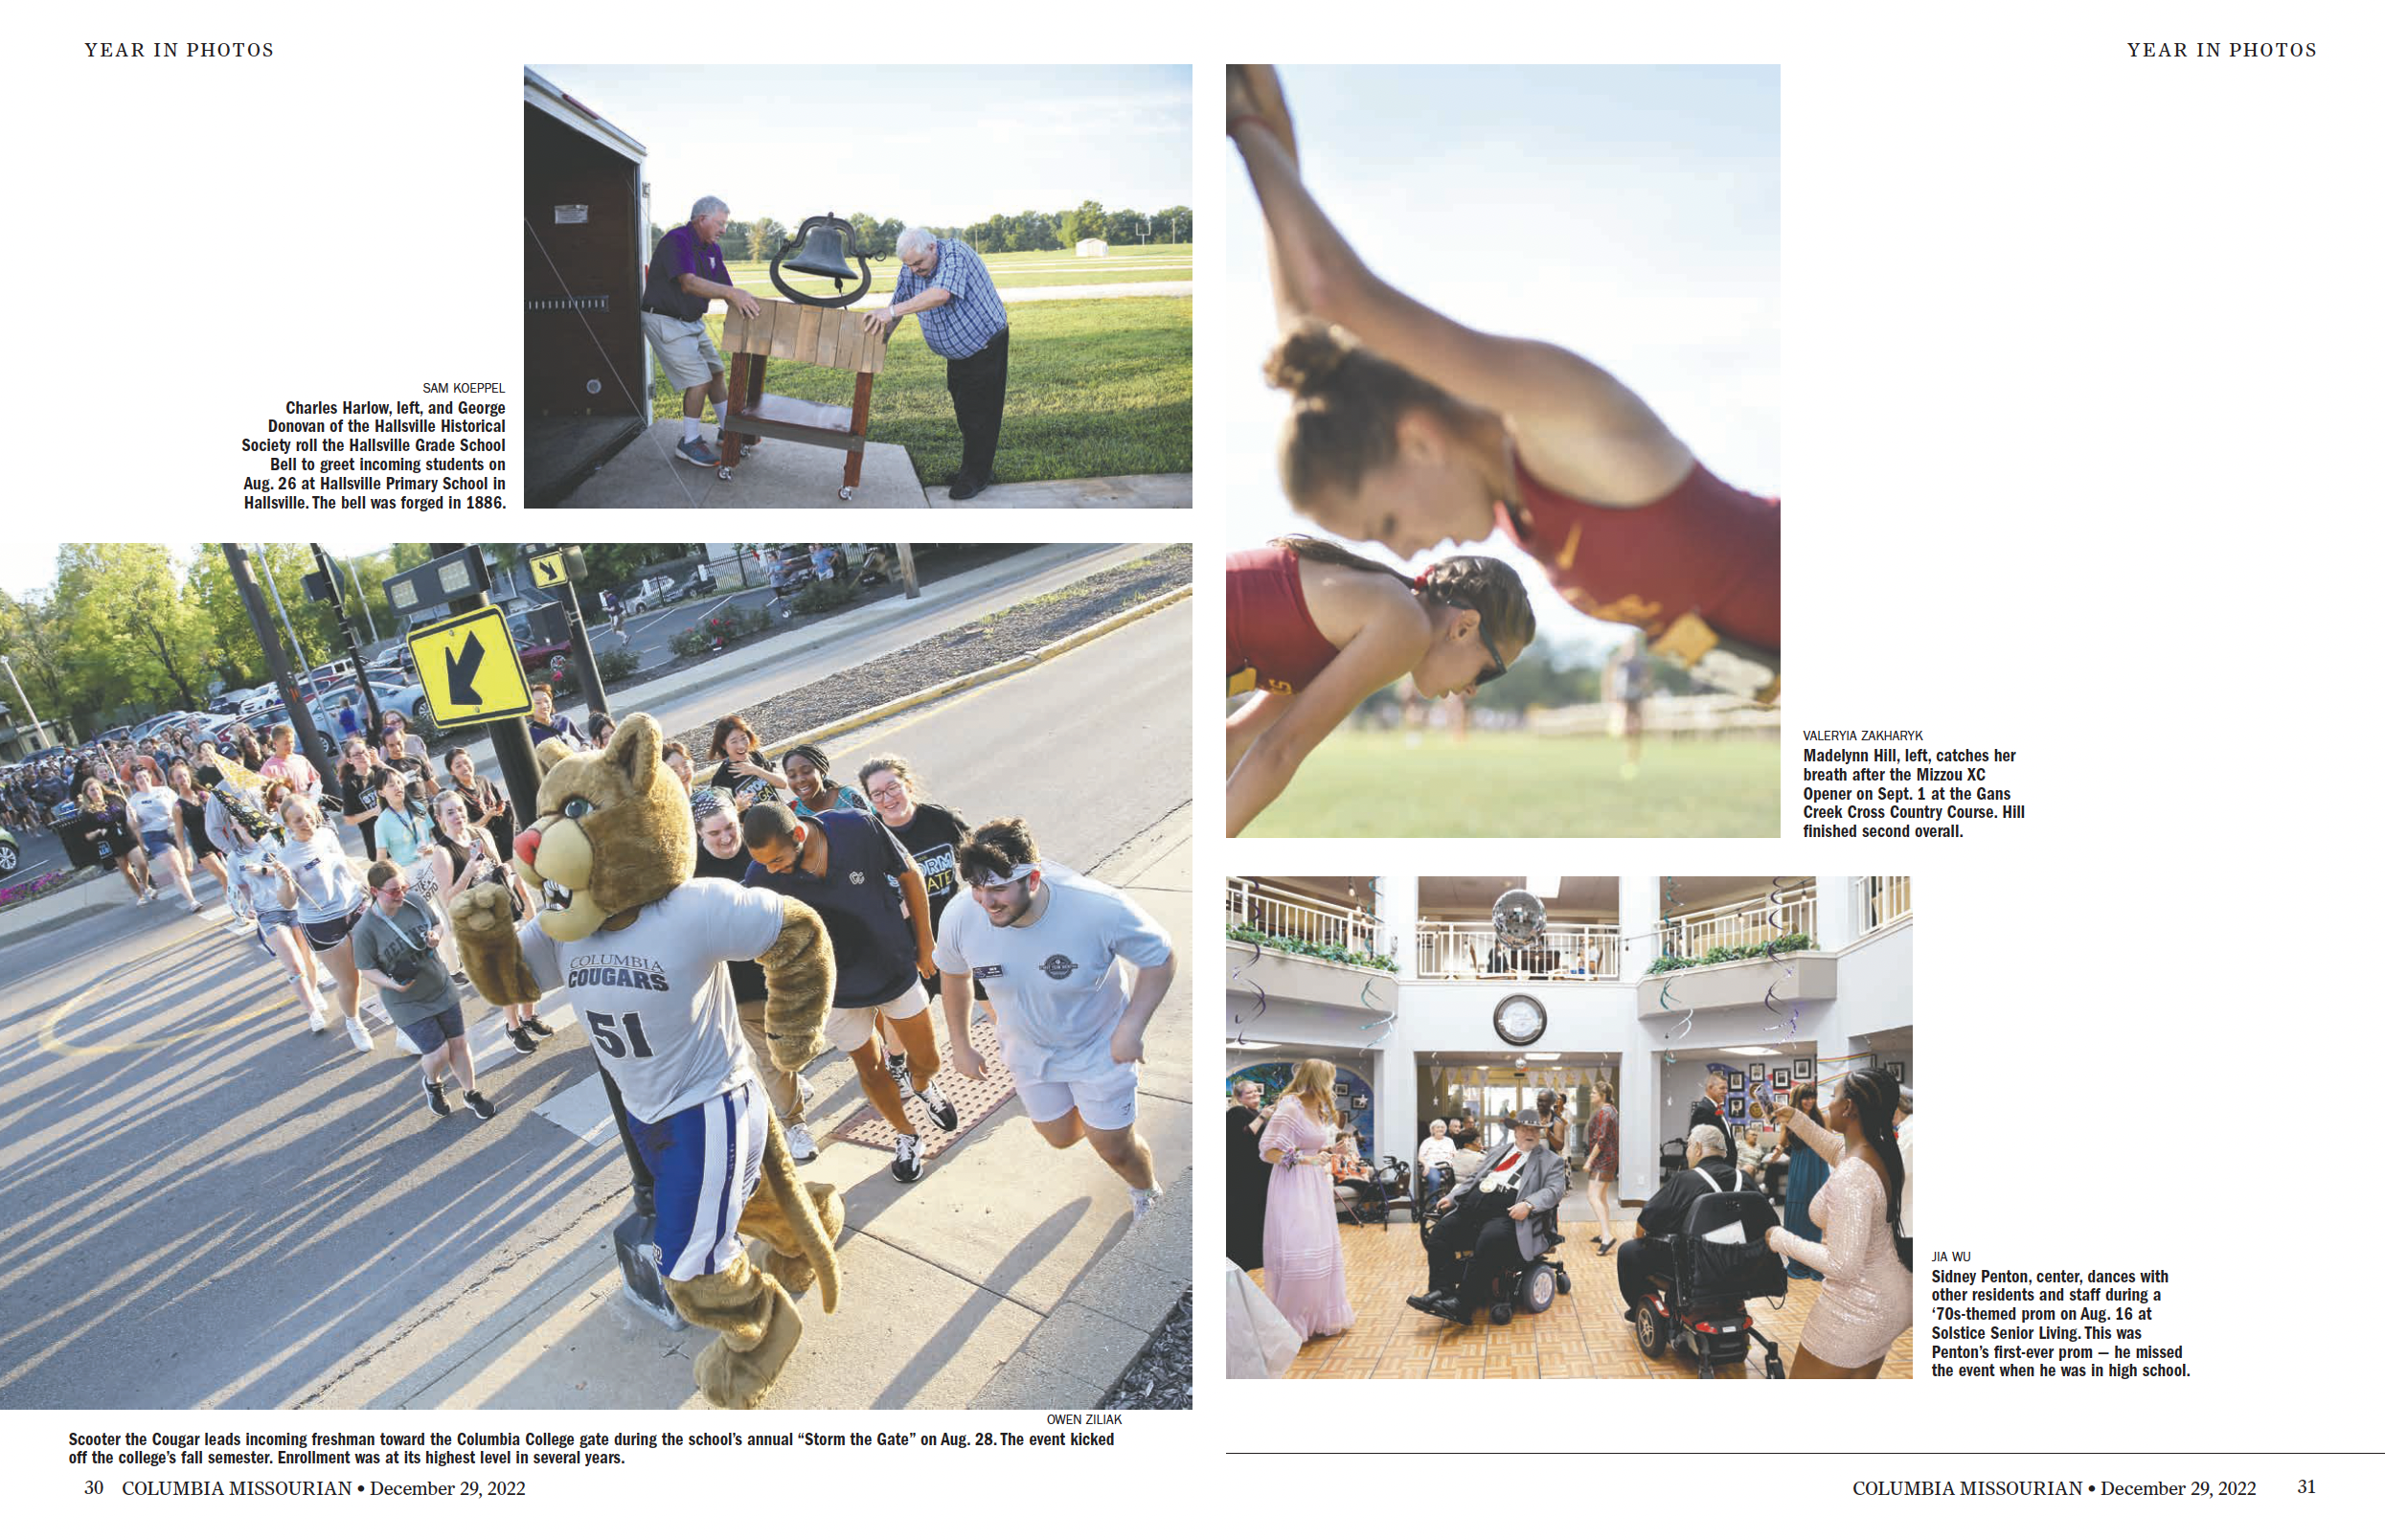 Columbia Missourian Year in Photos